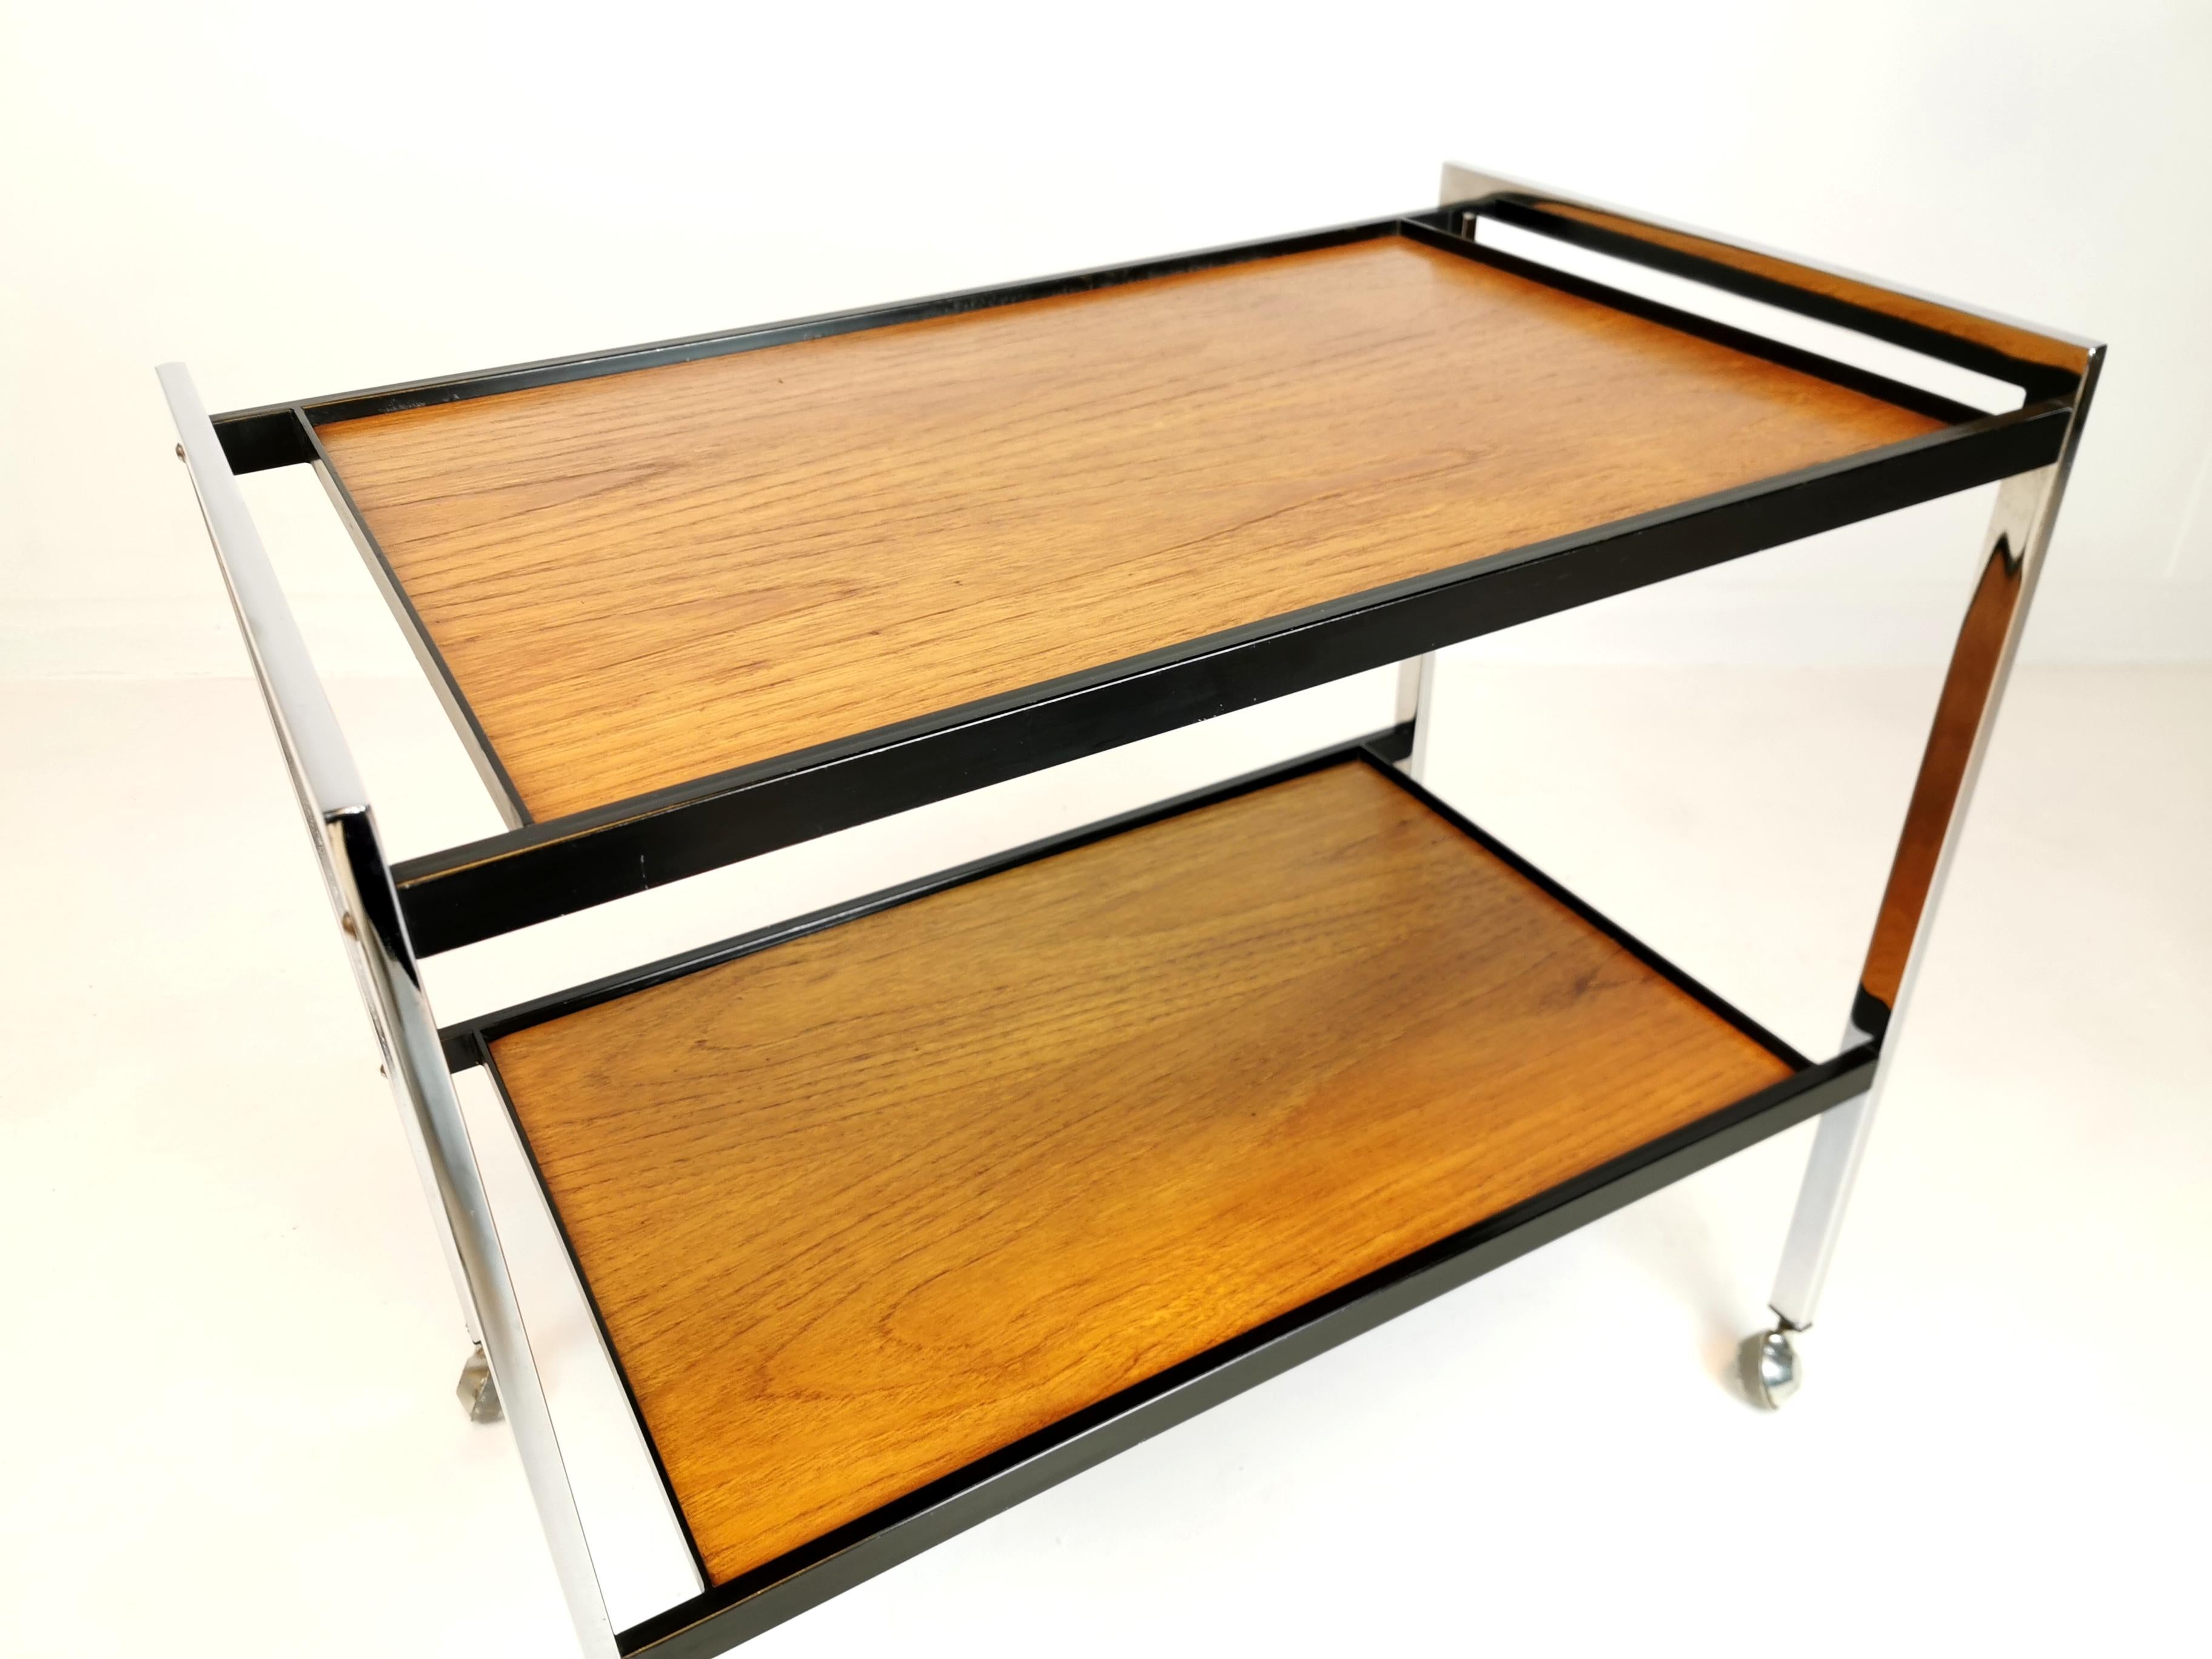 20th Century 1970s Chrome and Teak Coffee Table Drinks Trolley by Howard Miller